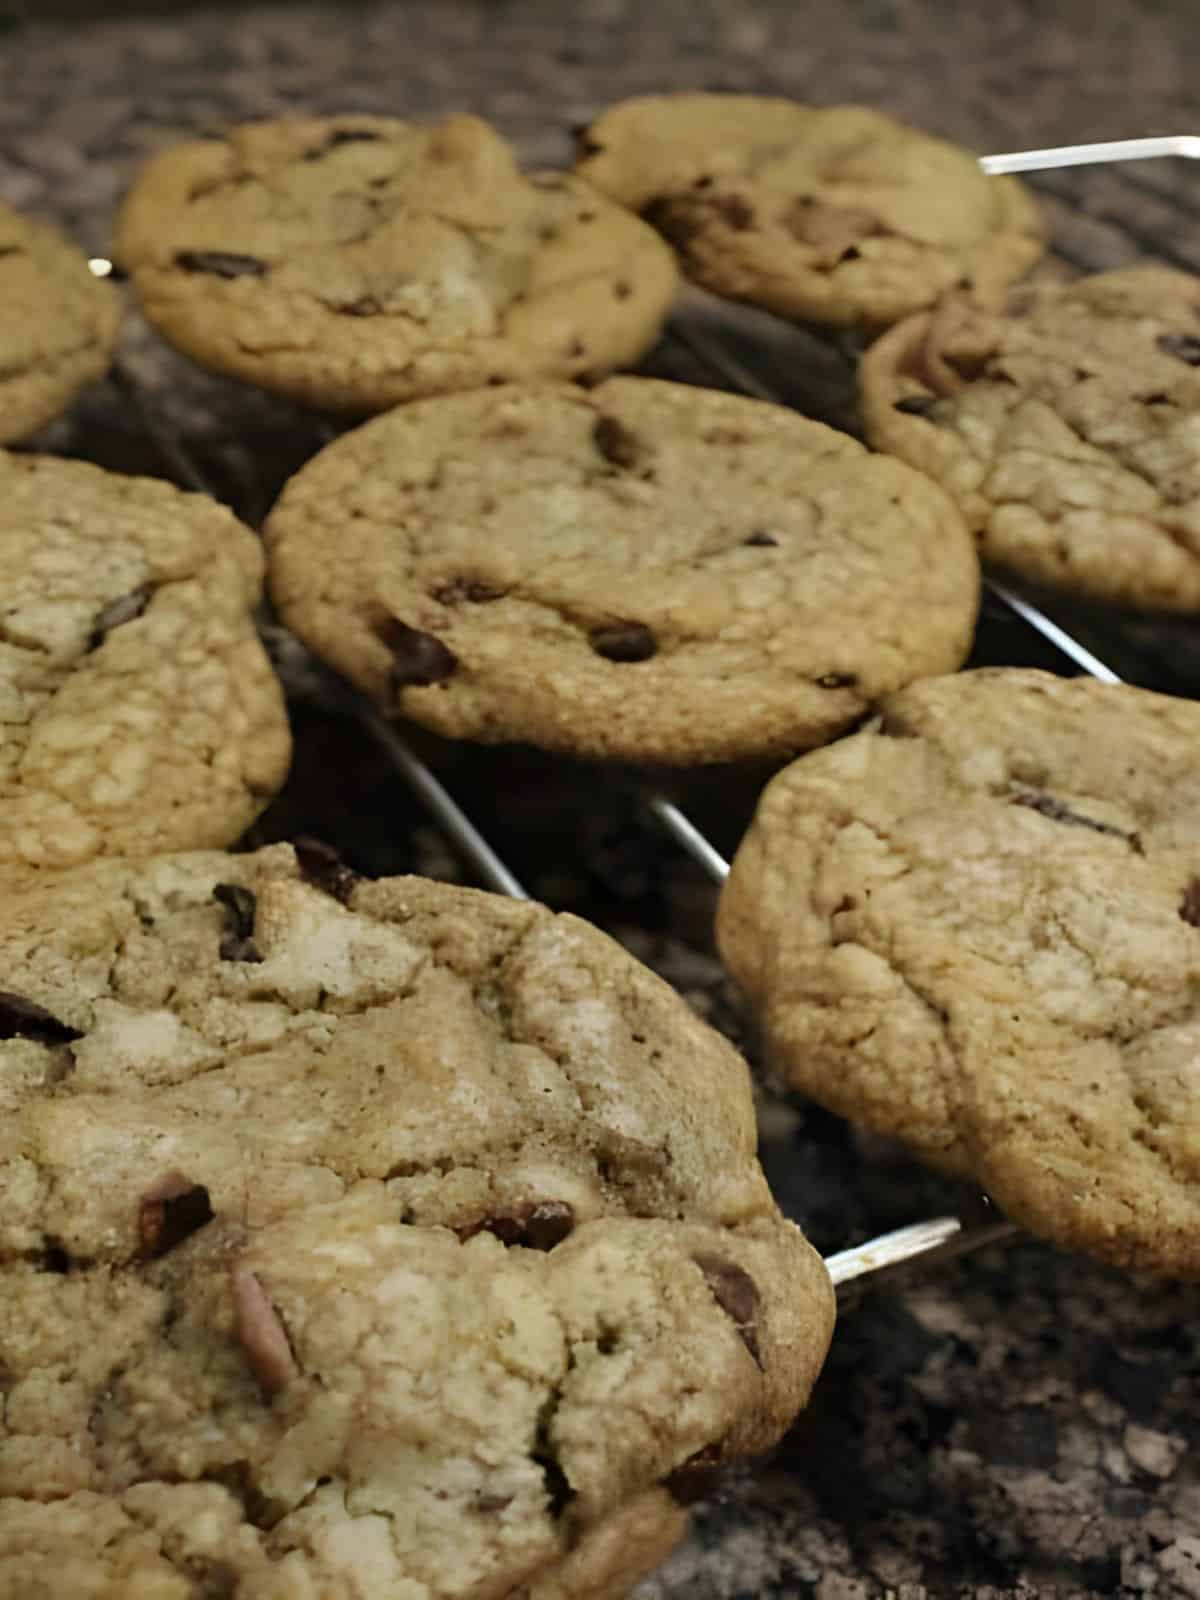 soft and chewy cookies made with coffee and chocolate chips.